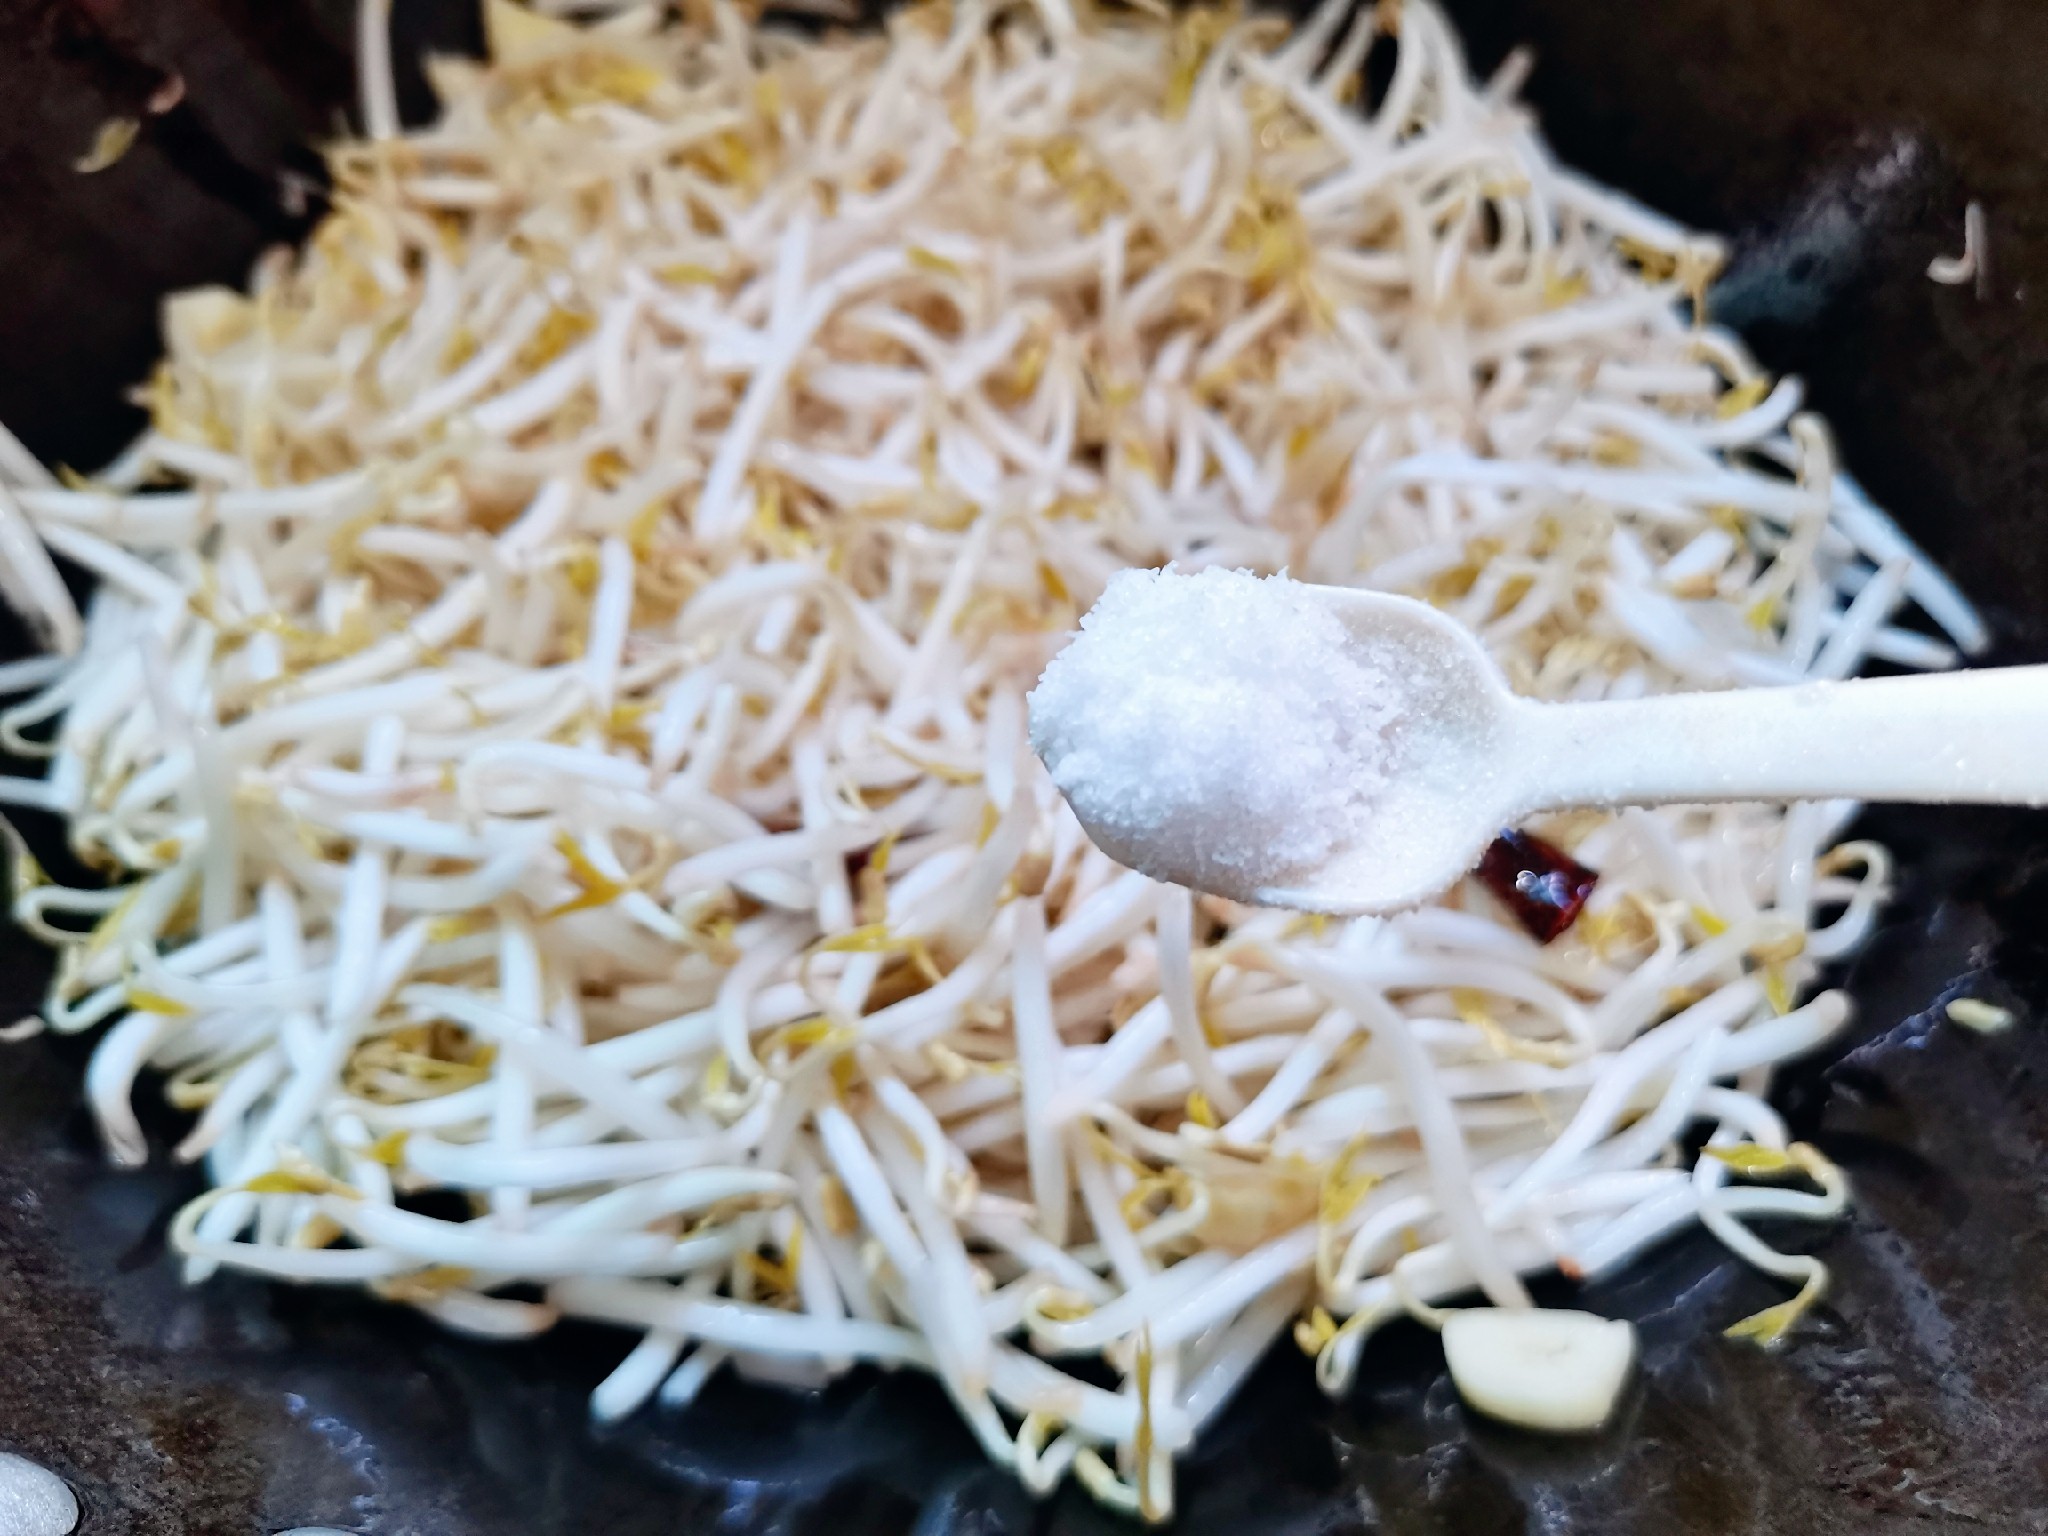 Stir-fried Bean Sprouts recipe